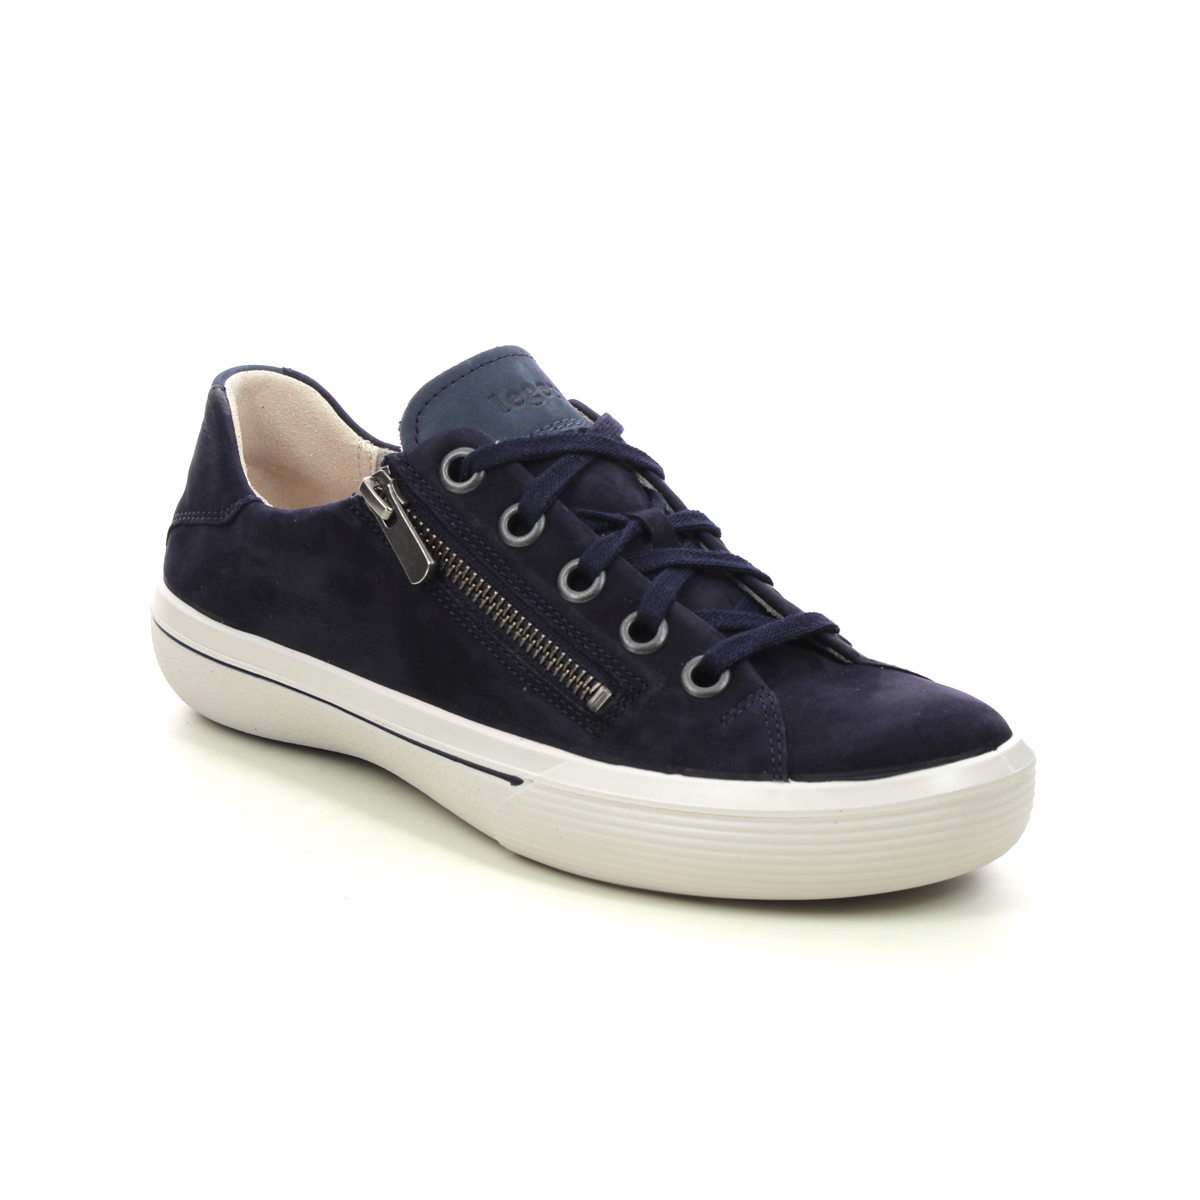 Legero Fresh Zip Navy Nubuck Womens trainers 2000117-8300 in a Plain Leather in Size 5